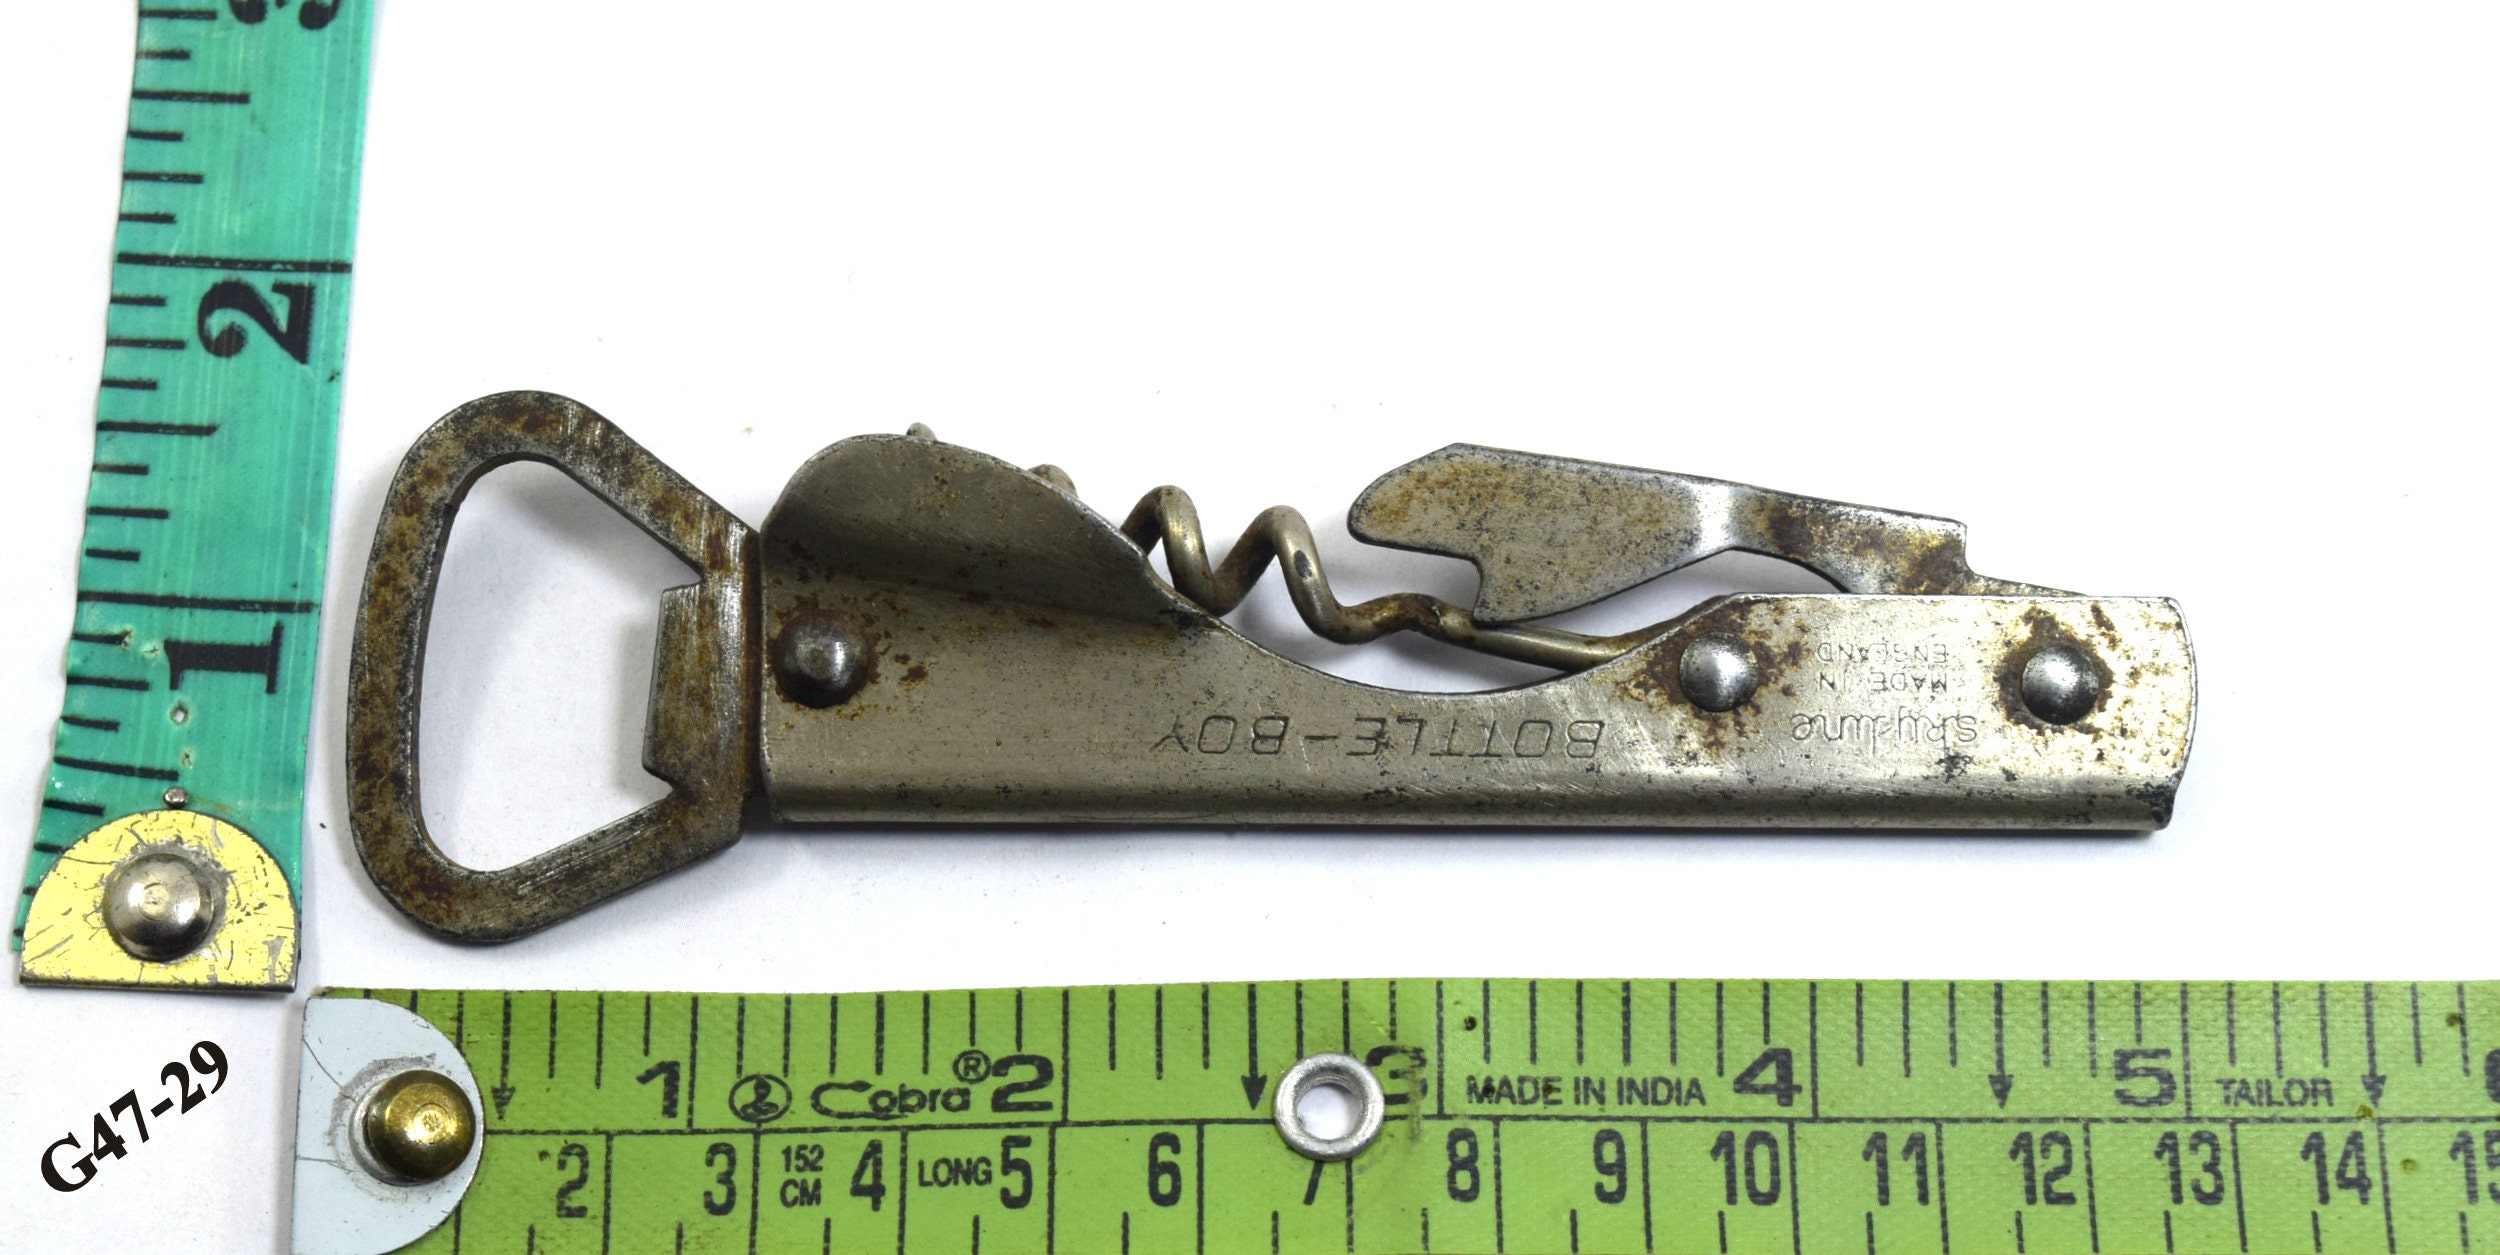 Unique Vintage Multifunctional Old Corkscrew Opener nice collectible.  G47-130 at Rs 1100/piece, Opener & Tools G47 in Jodhpur